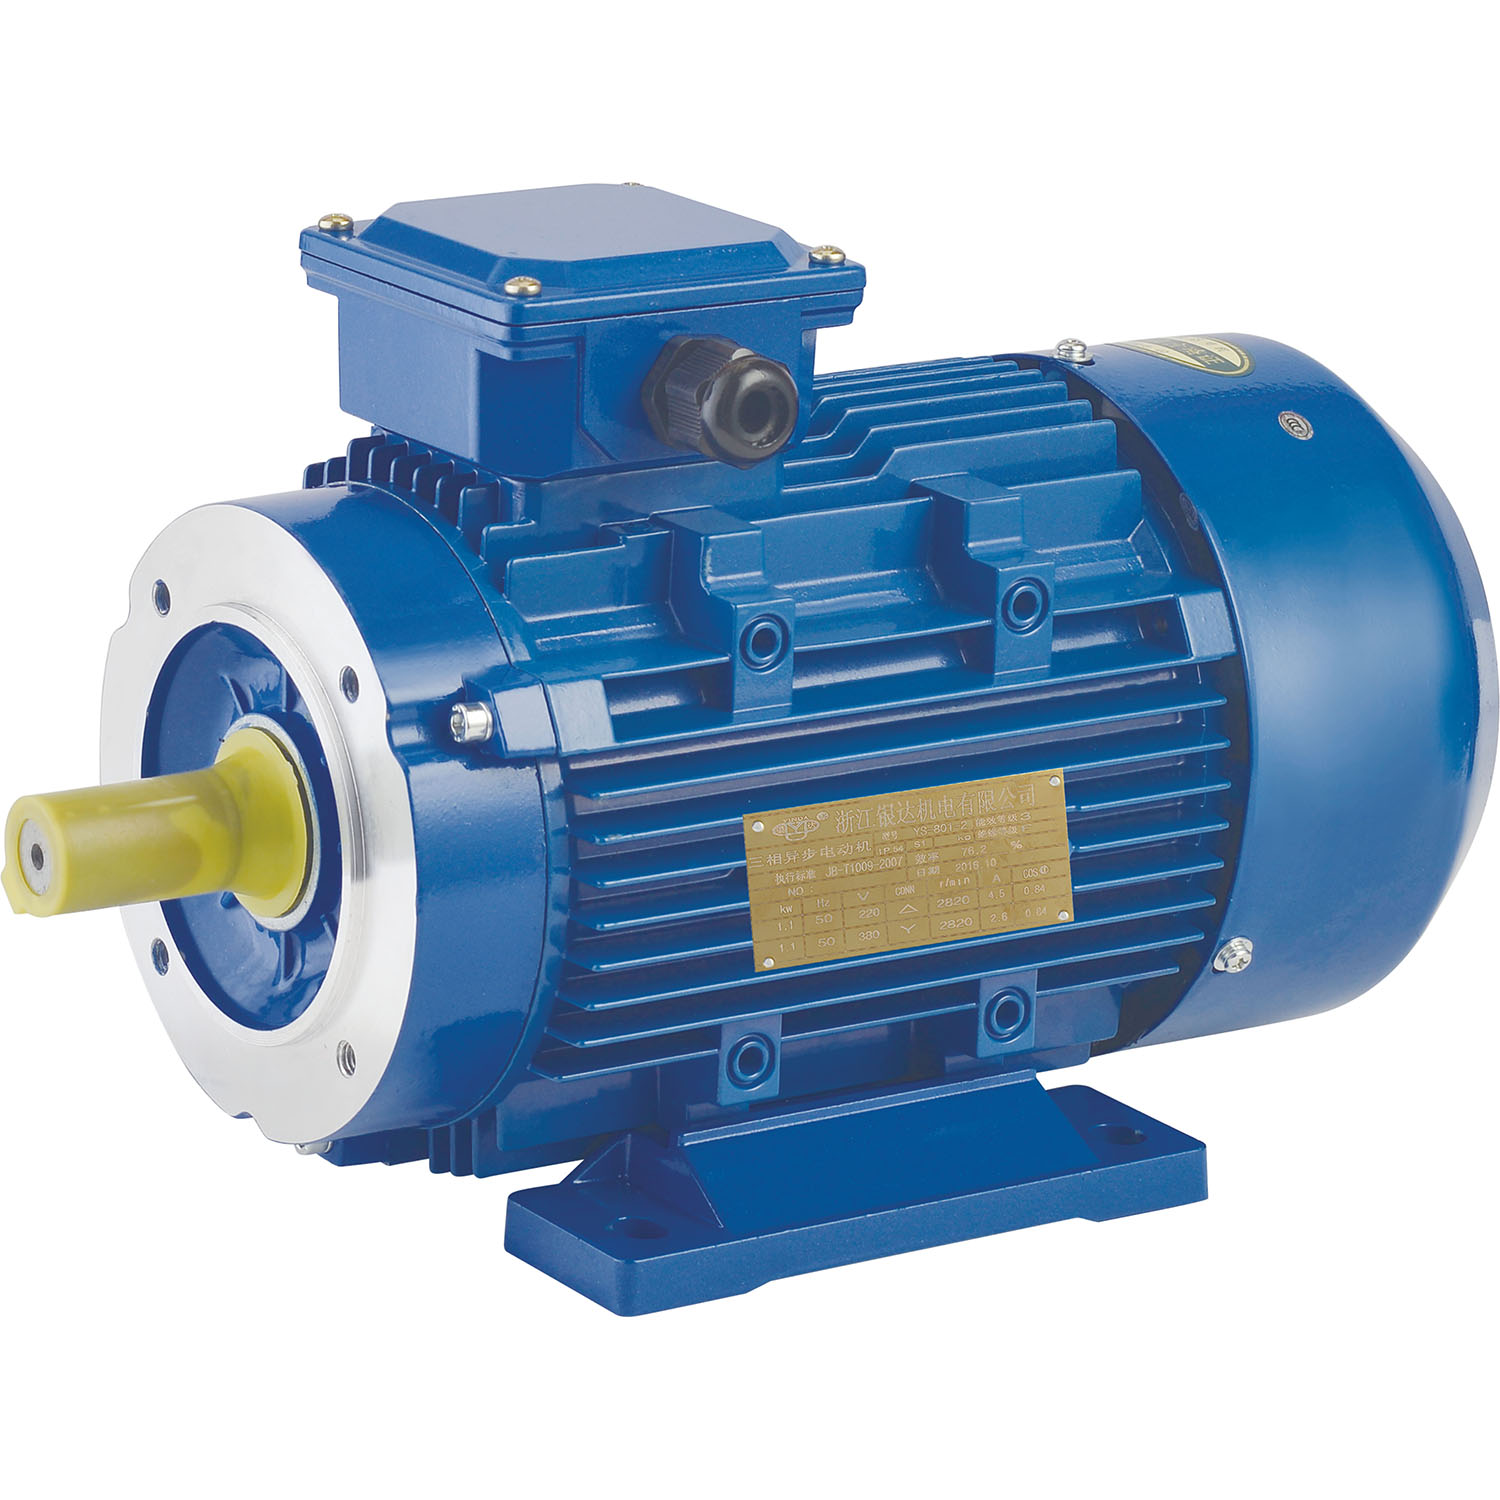 YX3-132S1-2 5.5KW 7.5HP aluminum cylinder series high efficiency three-phase asynchronous motor